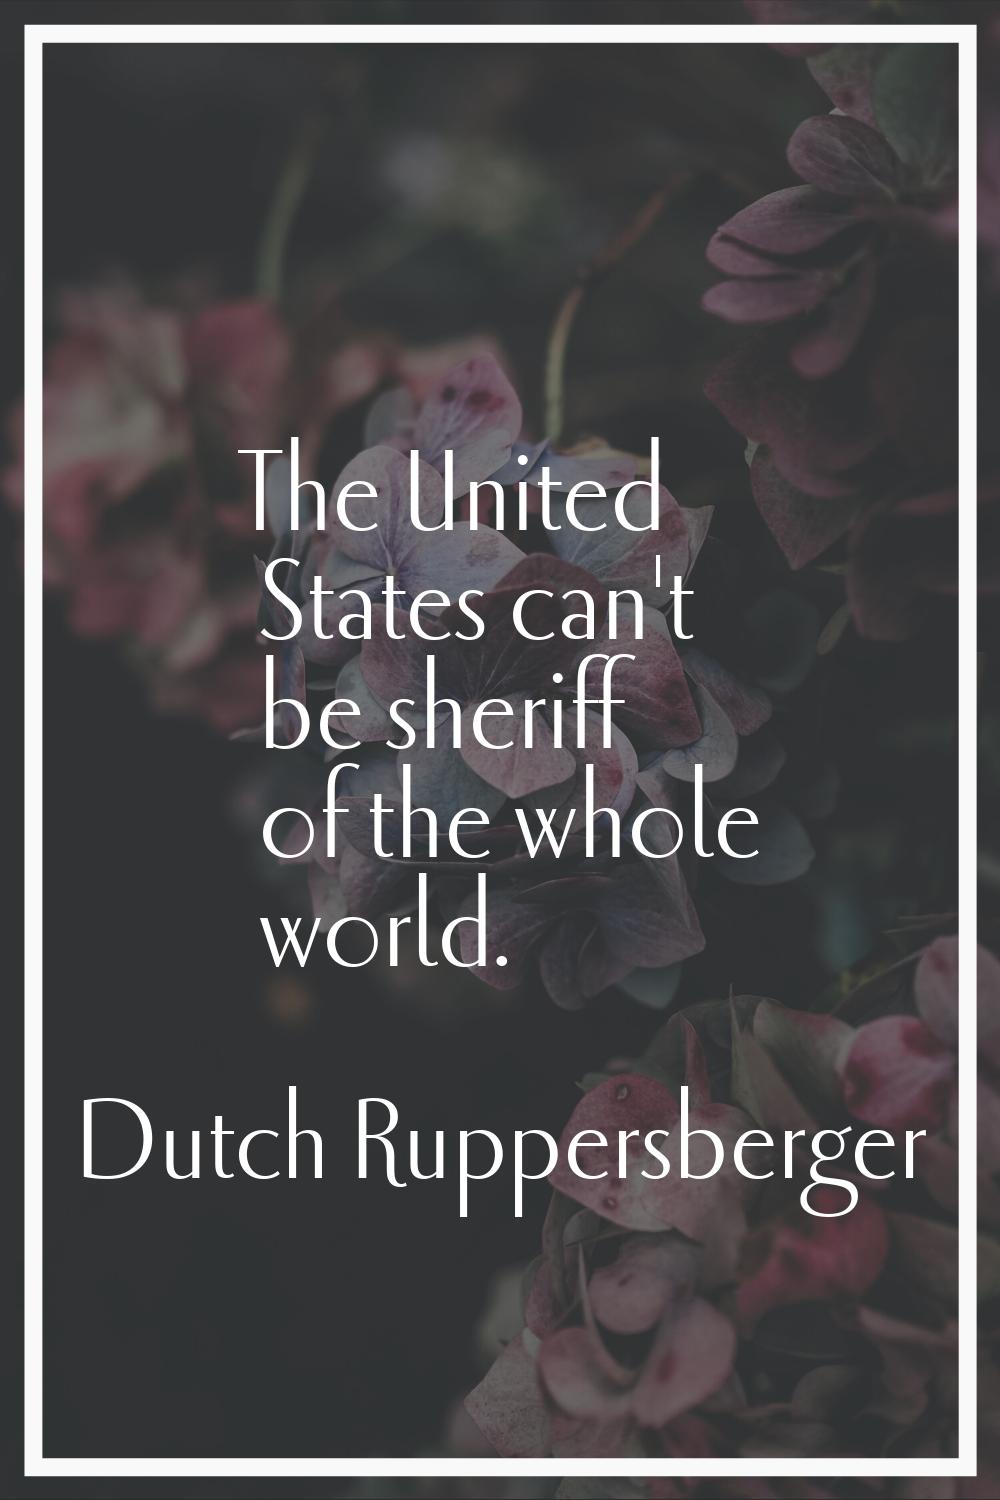 The United States can't be sheriff of the whole world.